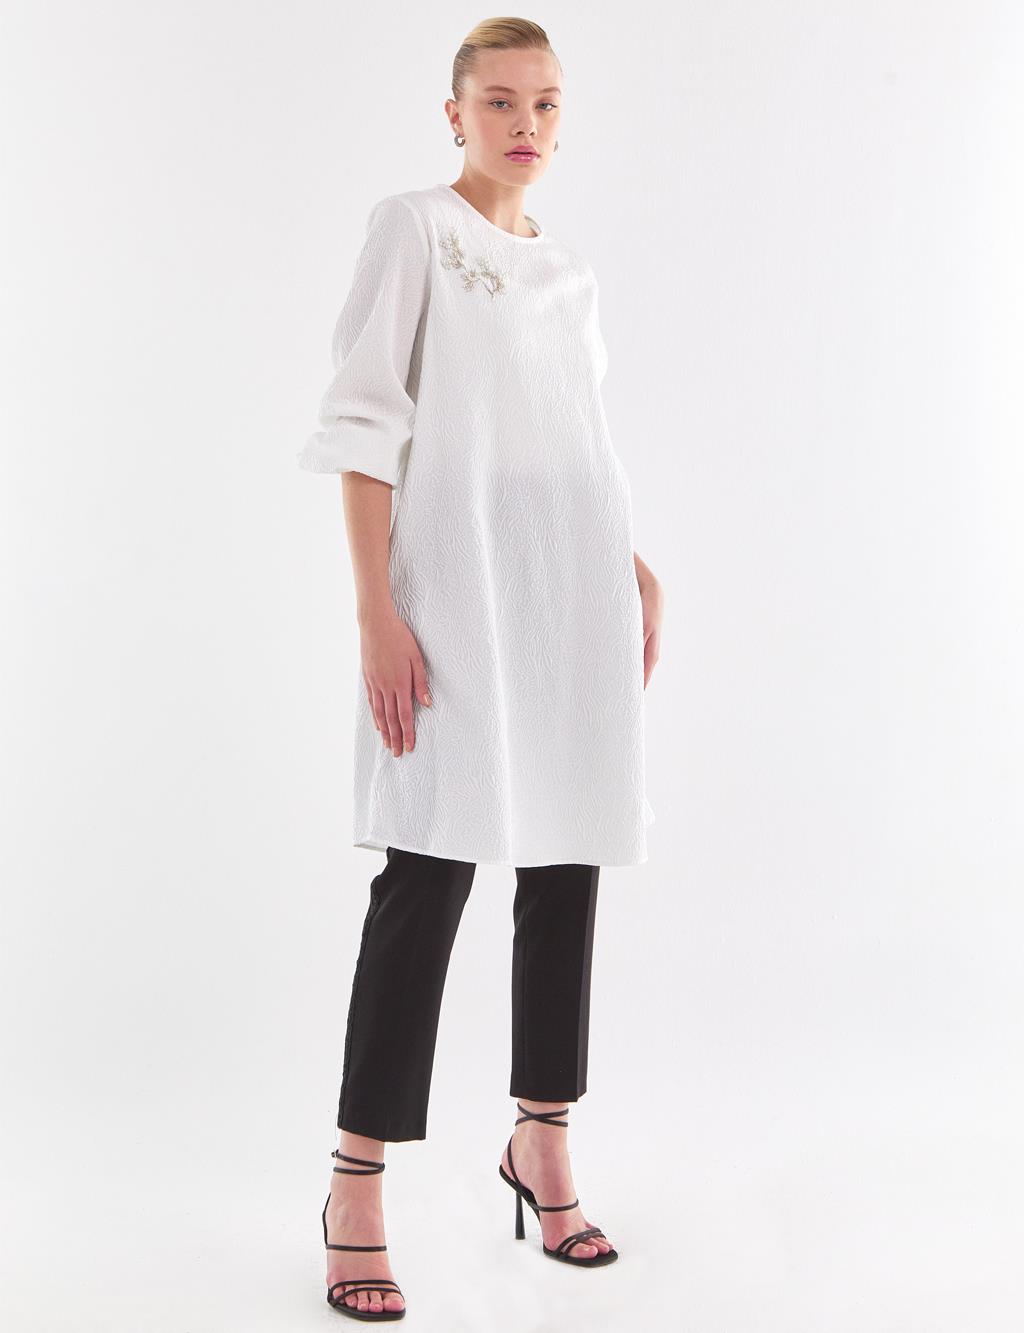 Embroidered Relief Pattern Tunic White